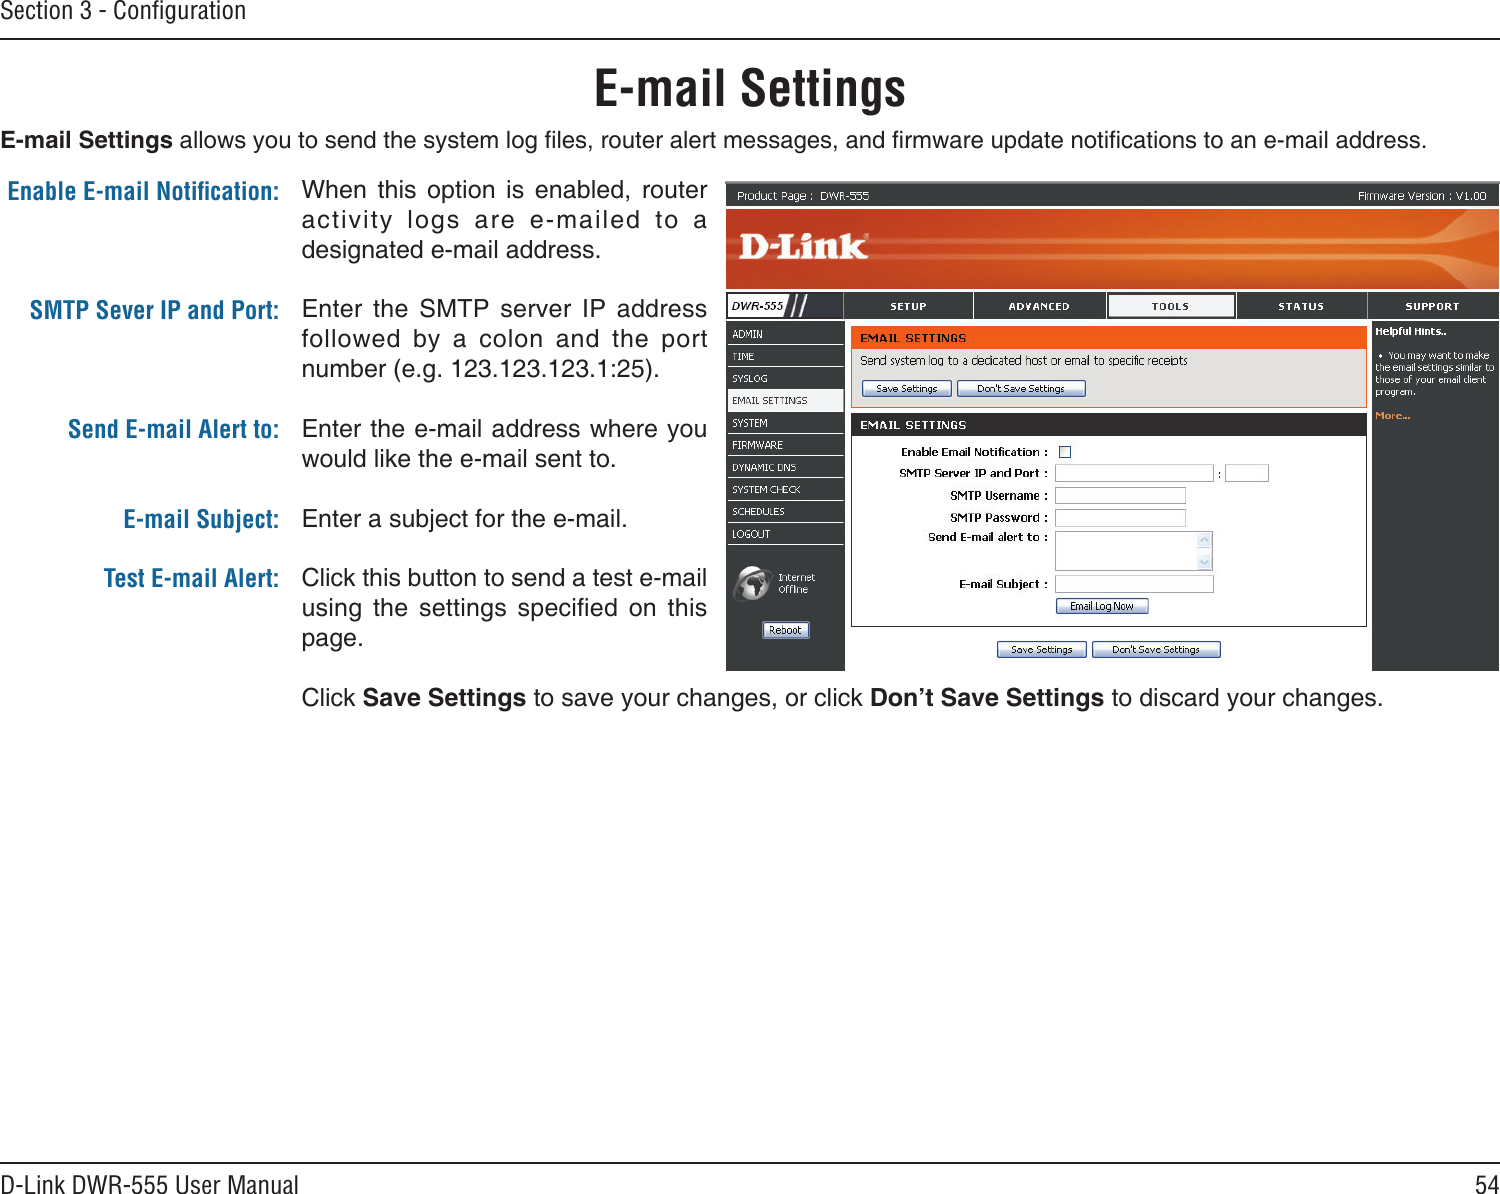 54D-Link DWR-555 User ManualSection 3 - ConﬁgurationE-mail SettingsWhen  this  option  is  enabled,  router activity  logs  are  e-mailed  to  a designated e-mail address.Enter  the  SMTP  server  IP  address followed  by  a  colon  and  the  port number (e.g. 123.123.123.1:25).Enter the e-mail address where you would like the e-mail sent to.Enter a subject for the e-mail.Click this button to send a test e-mail using  the  settings  specied  on  this page.Click Save Settings to save your changes, or click Don’t Save Settings to discard your changes.Enable E-mail Notiﬁcation:SMTP Sever IP and Port:  Send E-mail Alert to: E-mail Subject:Test E-mail Alert:E-mail Settings allows you to send the system log les, router alert messages, and rmware update notications to an e-mail address.